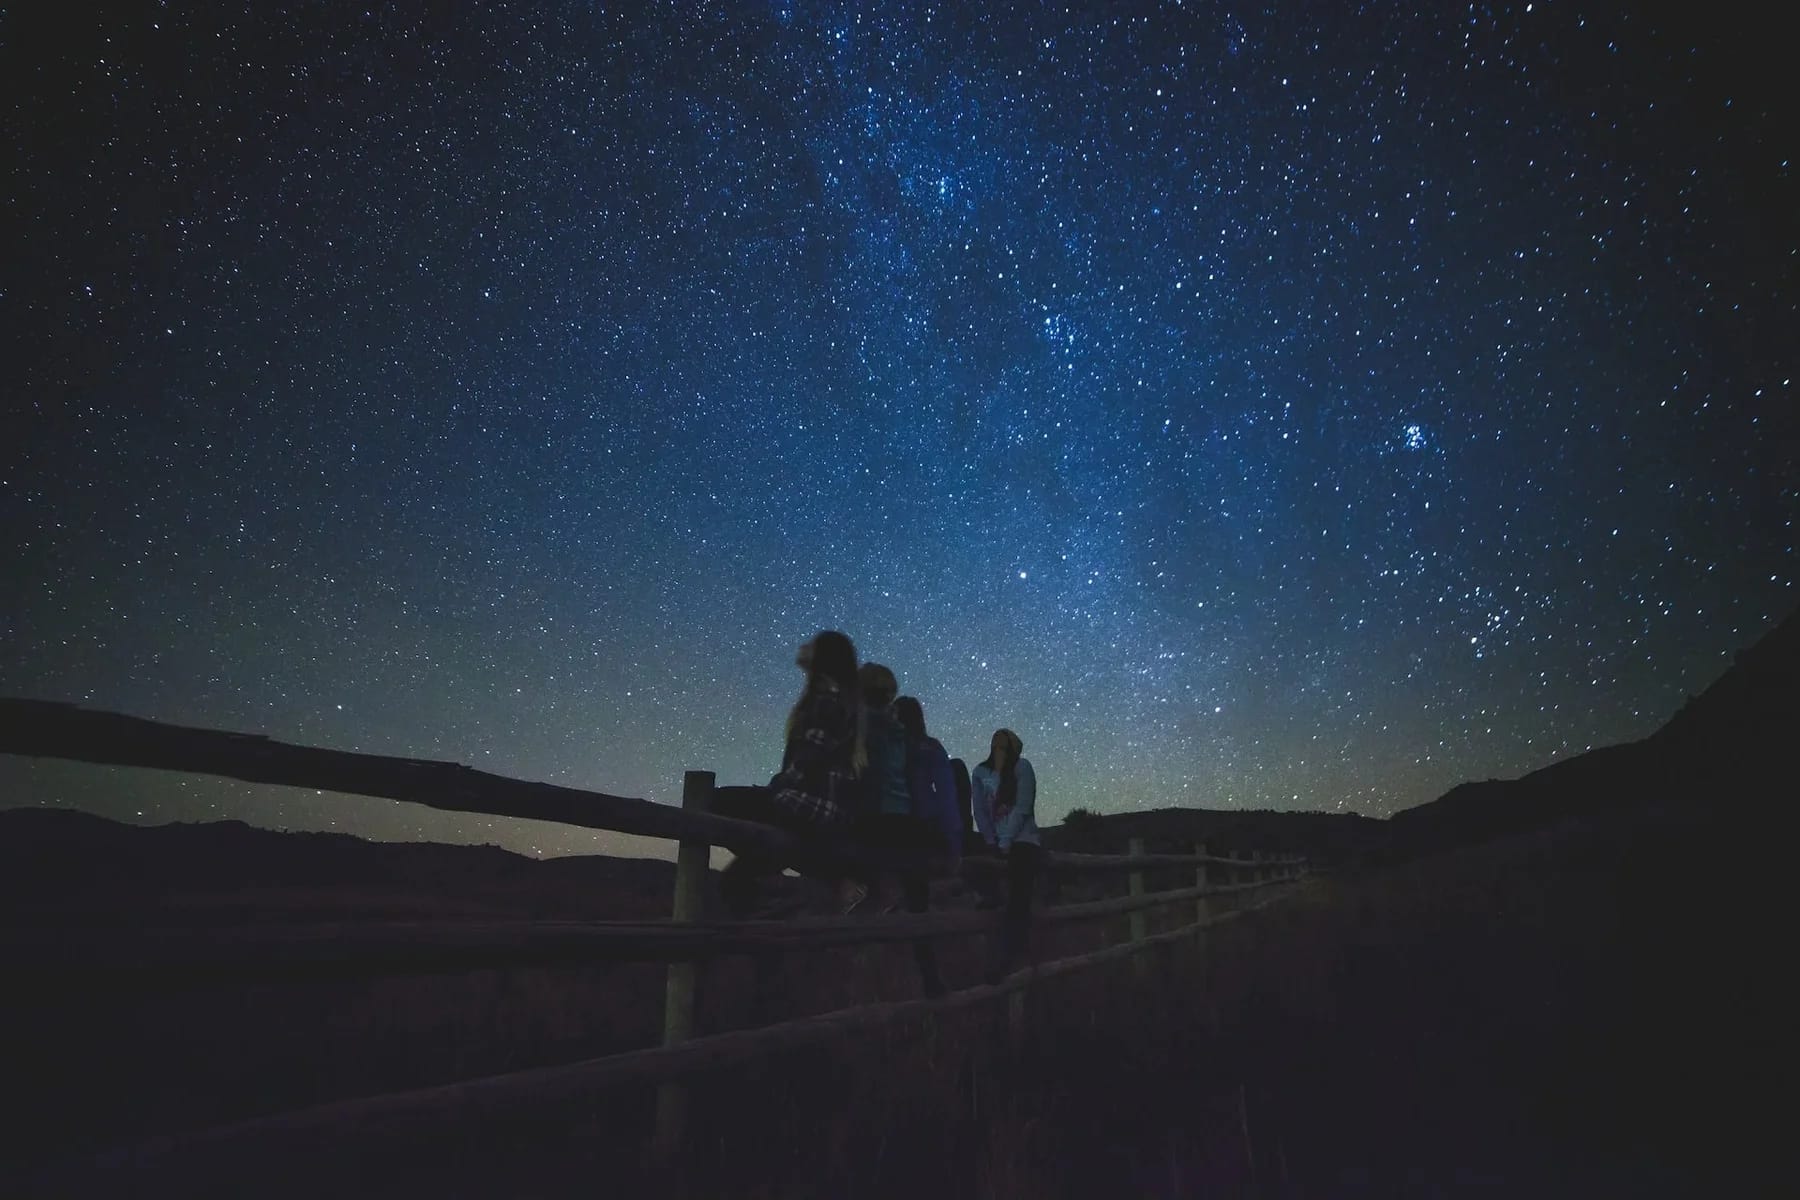 Image of family star gazing to convey astro tourism for families